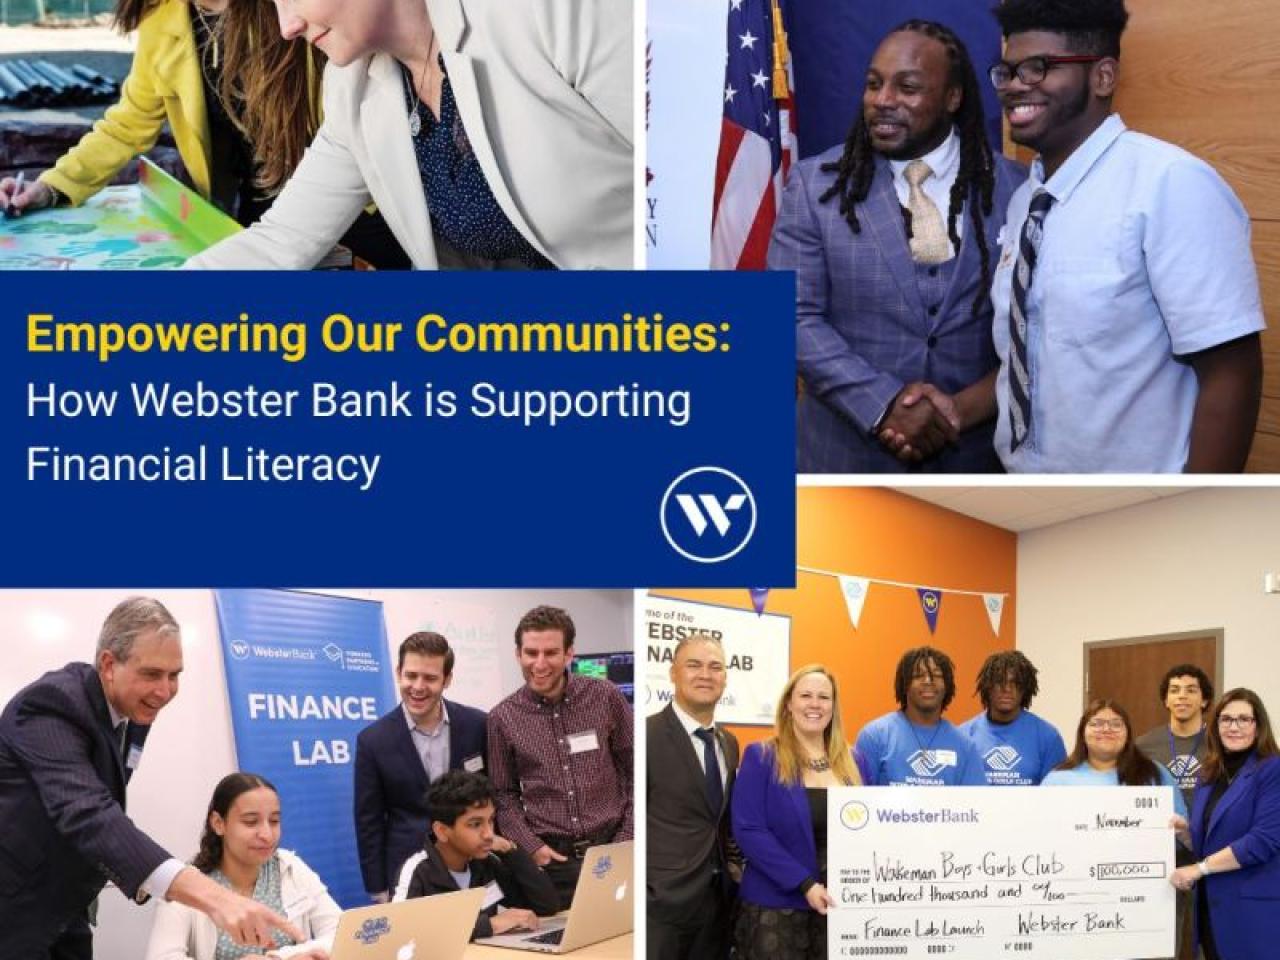 Collage of people shaking hands, Adults helping kids working on laptops, and a group posed with a large check. "Empowering communities..."